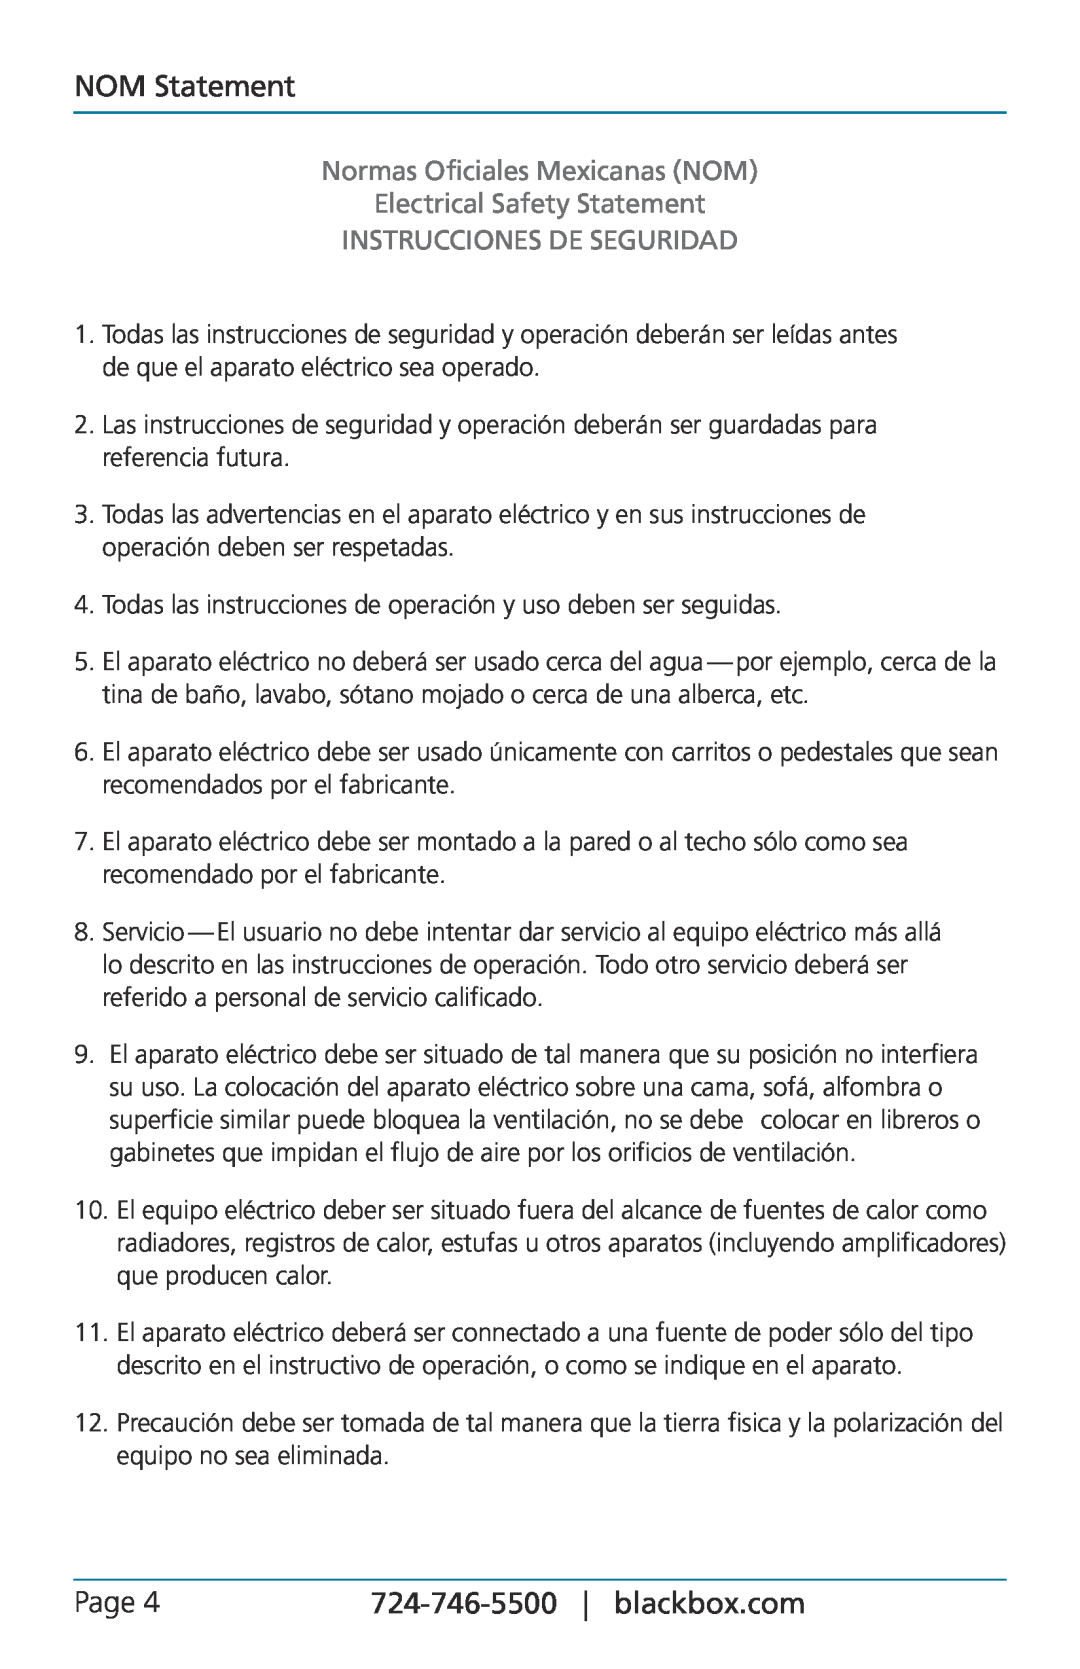 Black Box lgb516a, lgb524a manual NOM Statement, Page, Normas Oficiales Mexicanas NOM, Electrical Safety Statement 